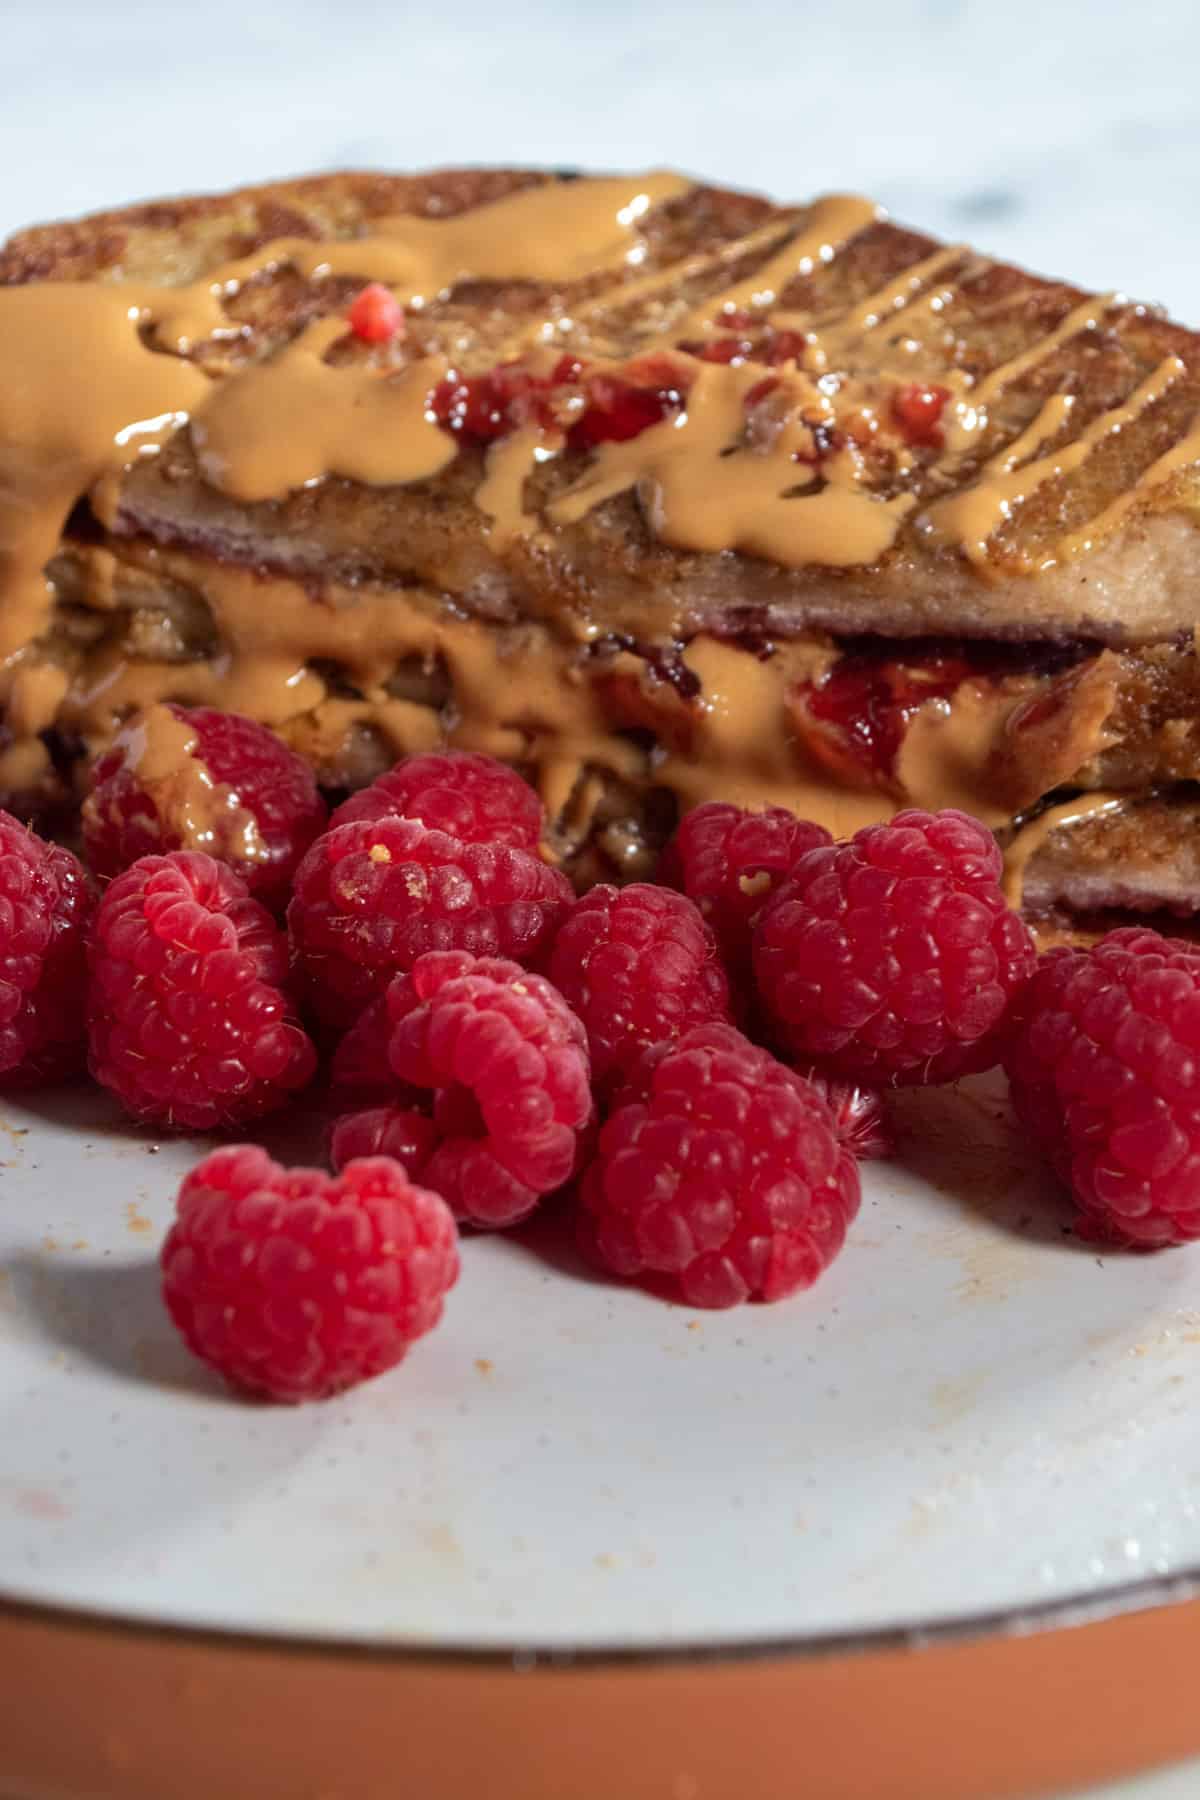 A low shot of the french toast. Lots of raspberries.